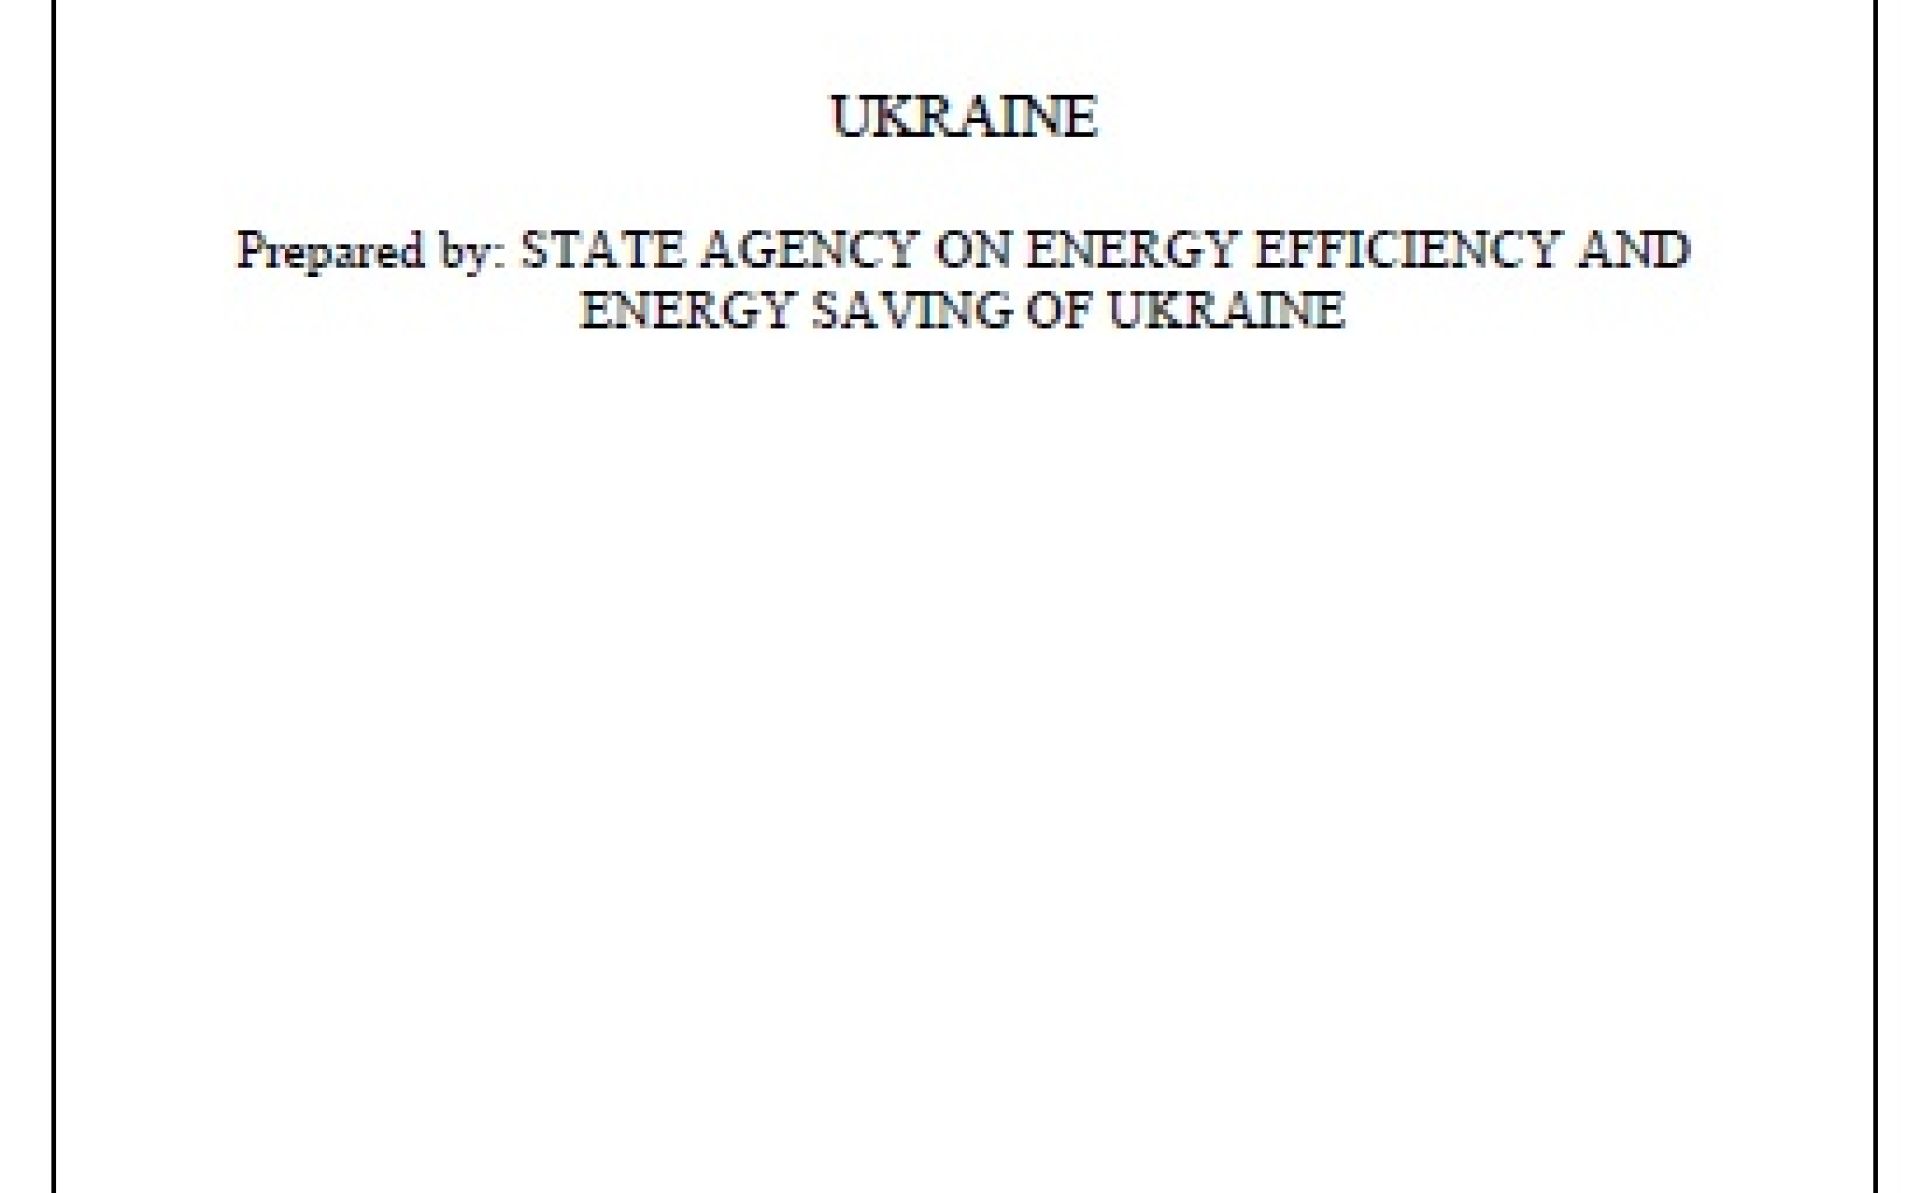 Fourth Annual Report under the Energy Efficiency Directive